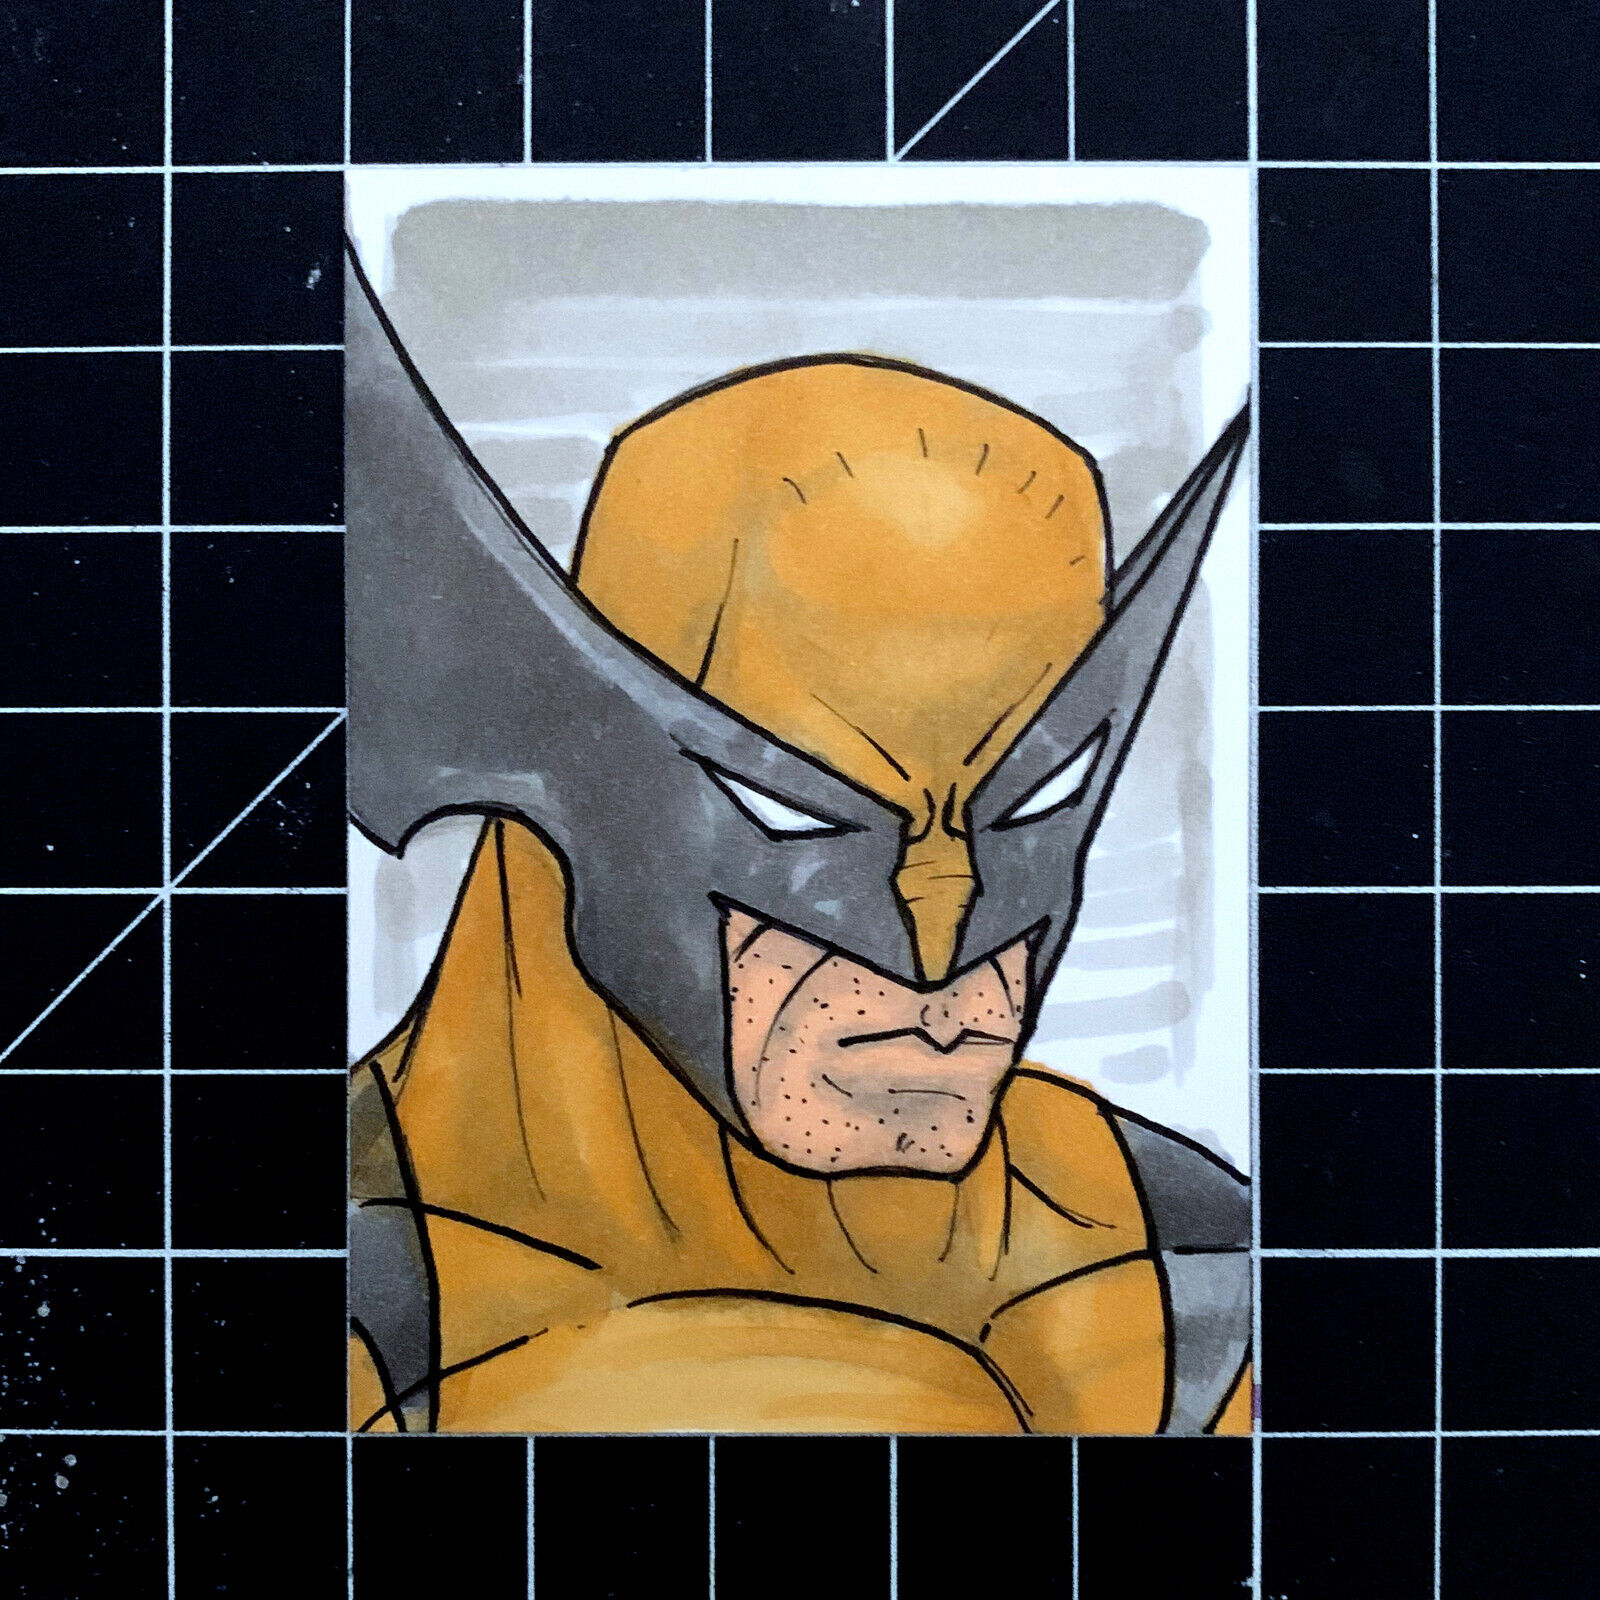 1 of 1 Extremely Rare Sketch Card of X-Men\'s Wolverine - Brown Costume Hot